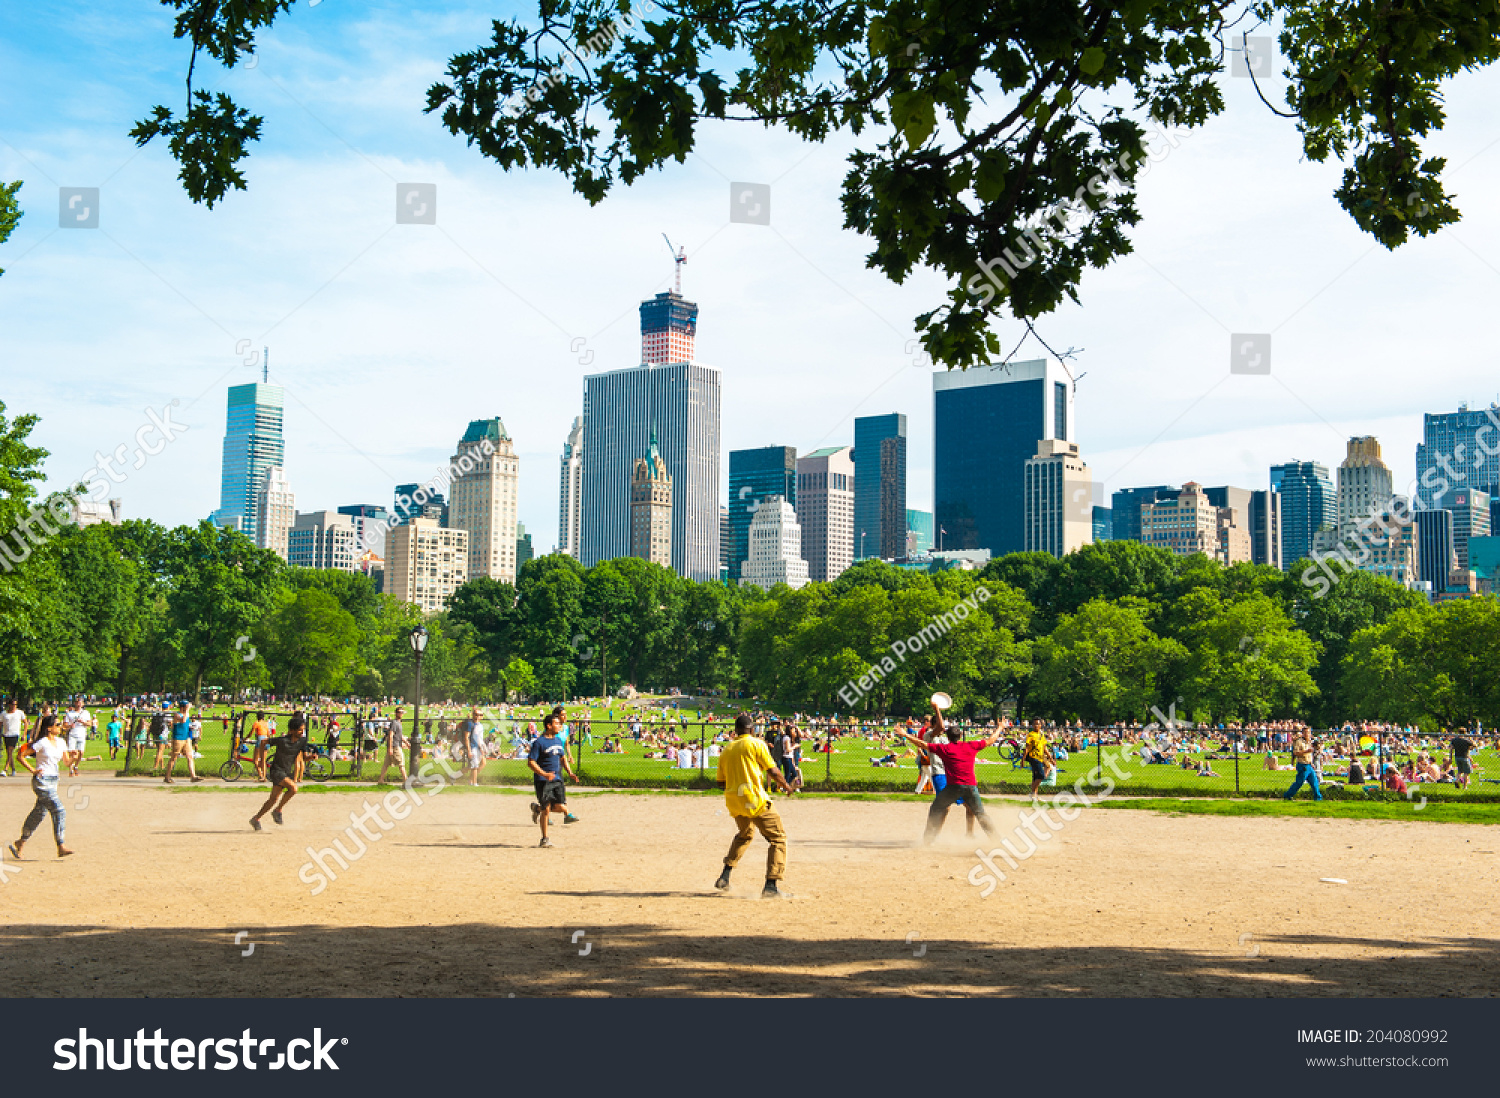 NEW YORK JUNE 8 People Central Stock Photo (Edit Now) 204080992